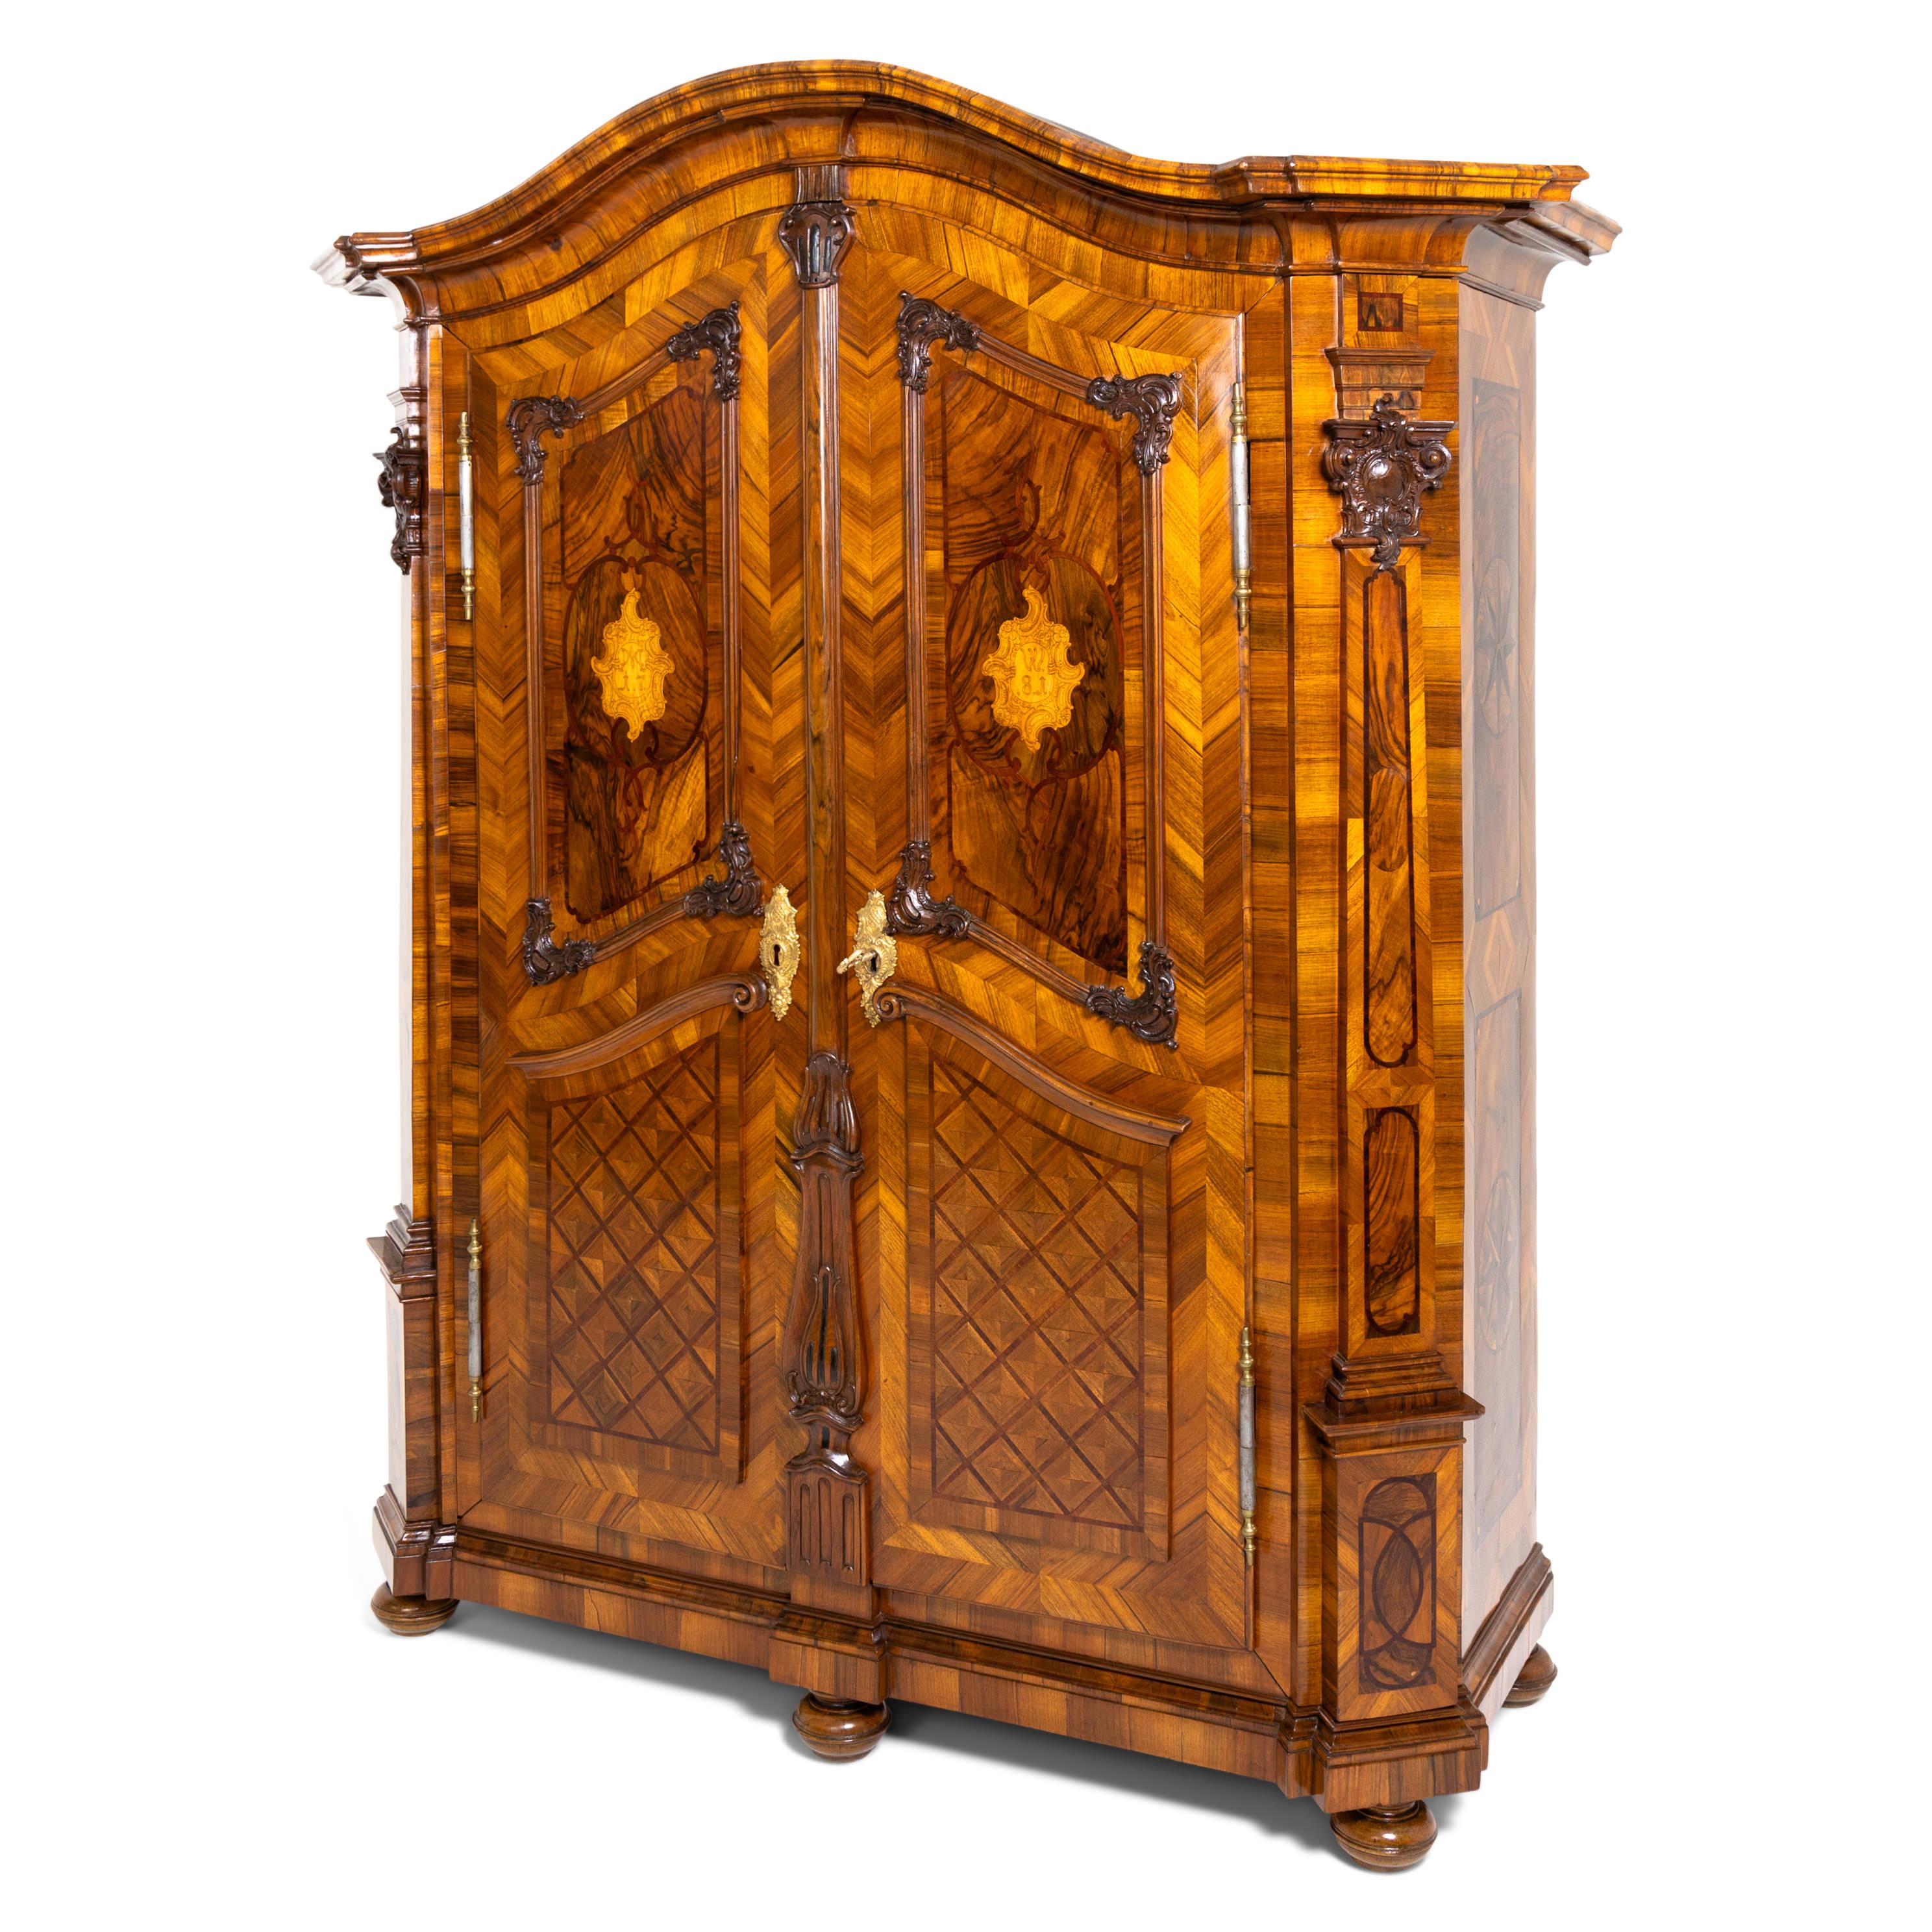 Large two-door Baroque cabinet, veneered in walnut, standing on pressed and profiled ball feet, with elaborate Rococo carving decoration and rich strap work marquetry. The cabinet is crowned by a curved, profiled pediment and flanked on the sides by